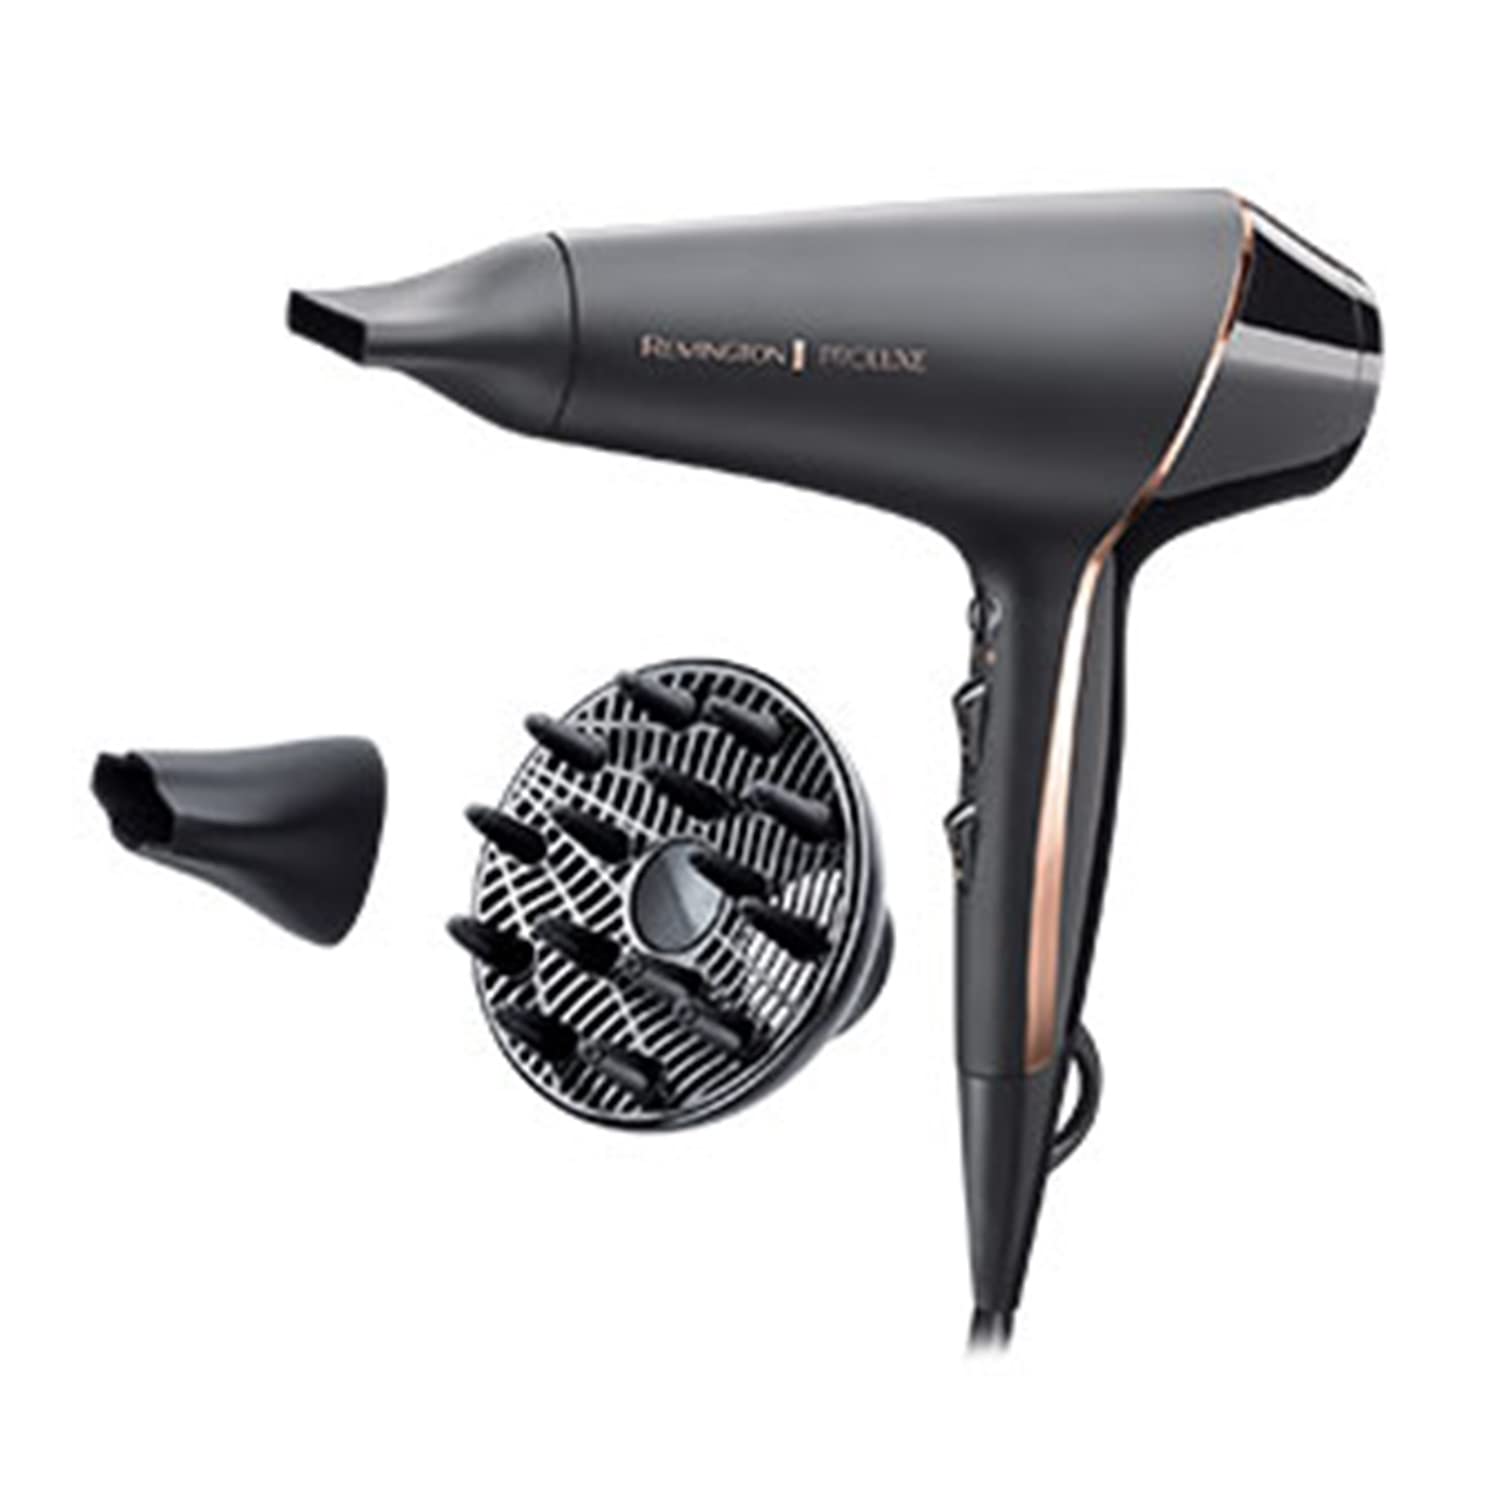 Remington Proluxe Ionic Hair Dryer with Styling Shot and Intelligent  OPTIHeat Control Settings 2400 W Midnight